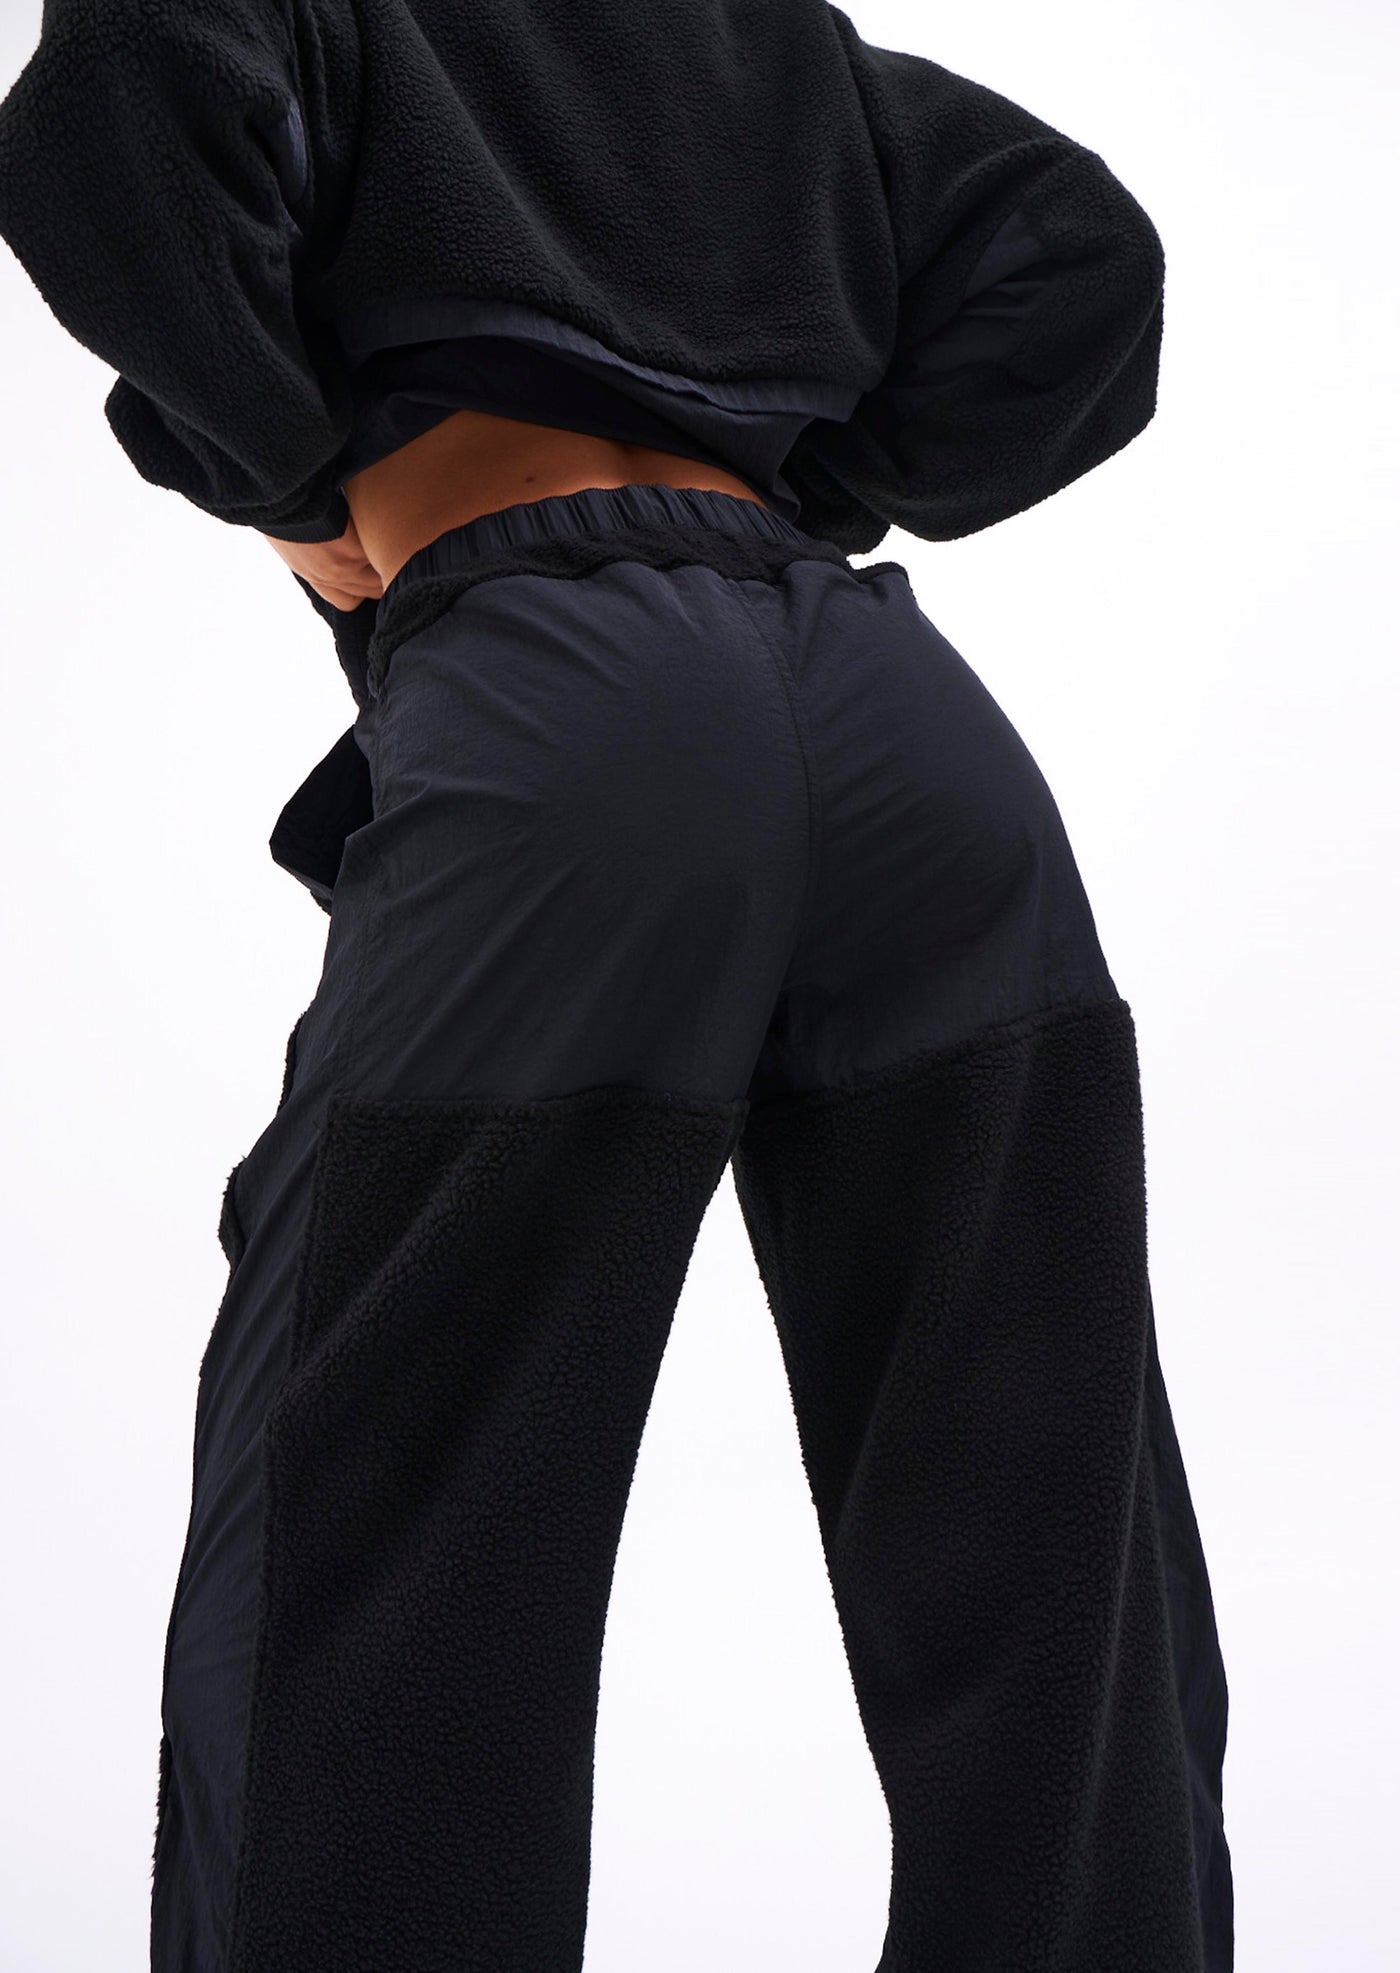 ALL ACES PANT IN BLACK